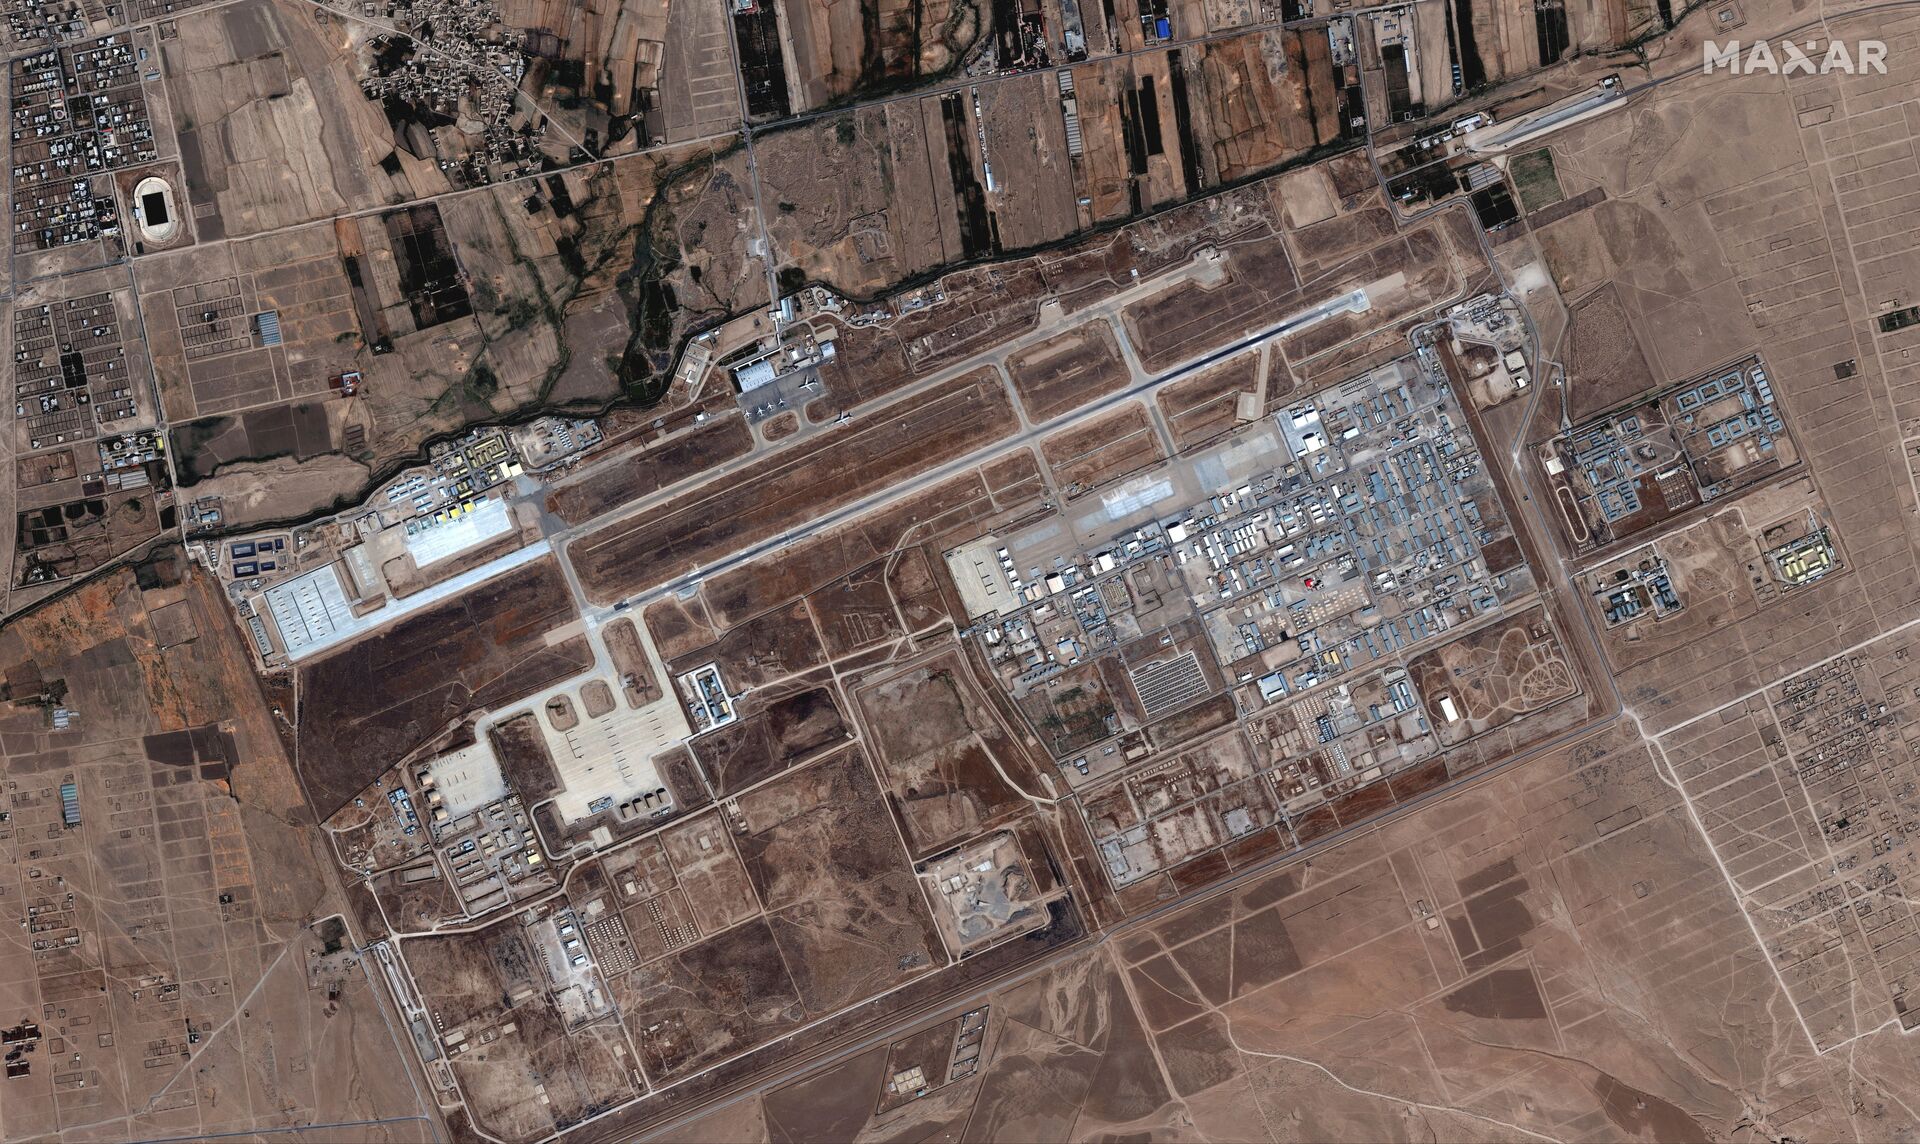 Six commercial airplanes are seen near the main terminal of the Mazar-i-Sharif airport, in northern Afghanistan, September 3 2021. Picture taken September 3, 2021. - Sputnik International, 1920, 07.09.2021